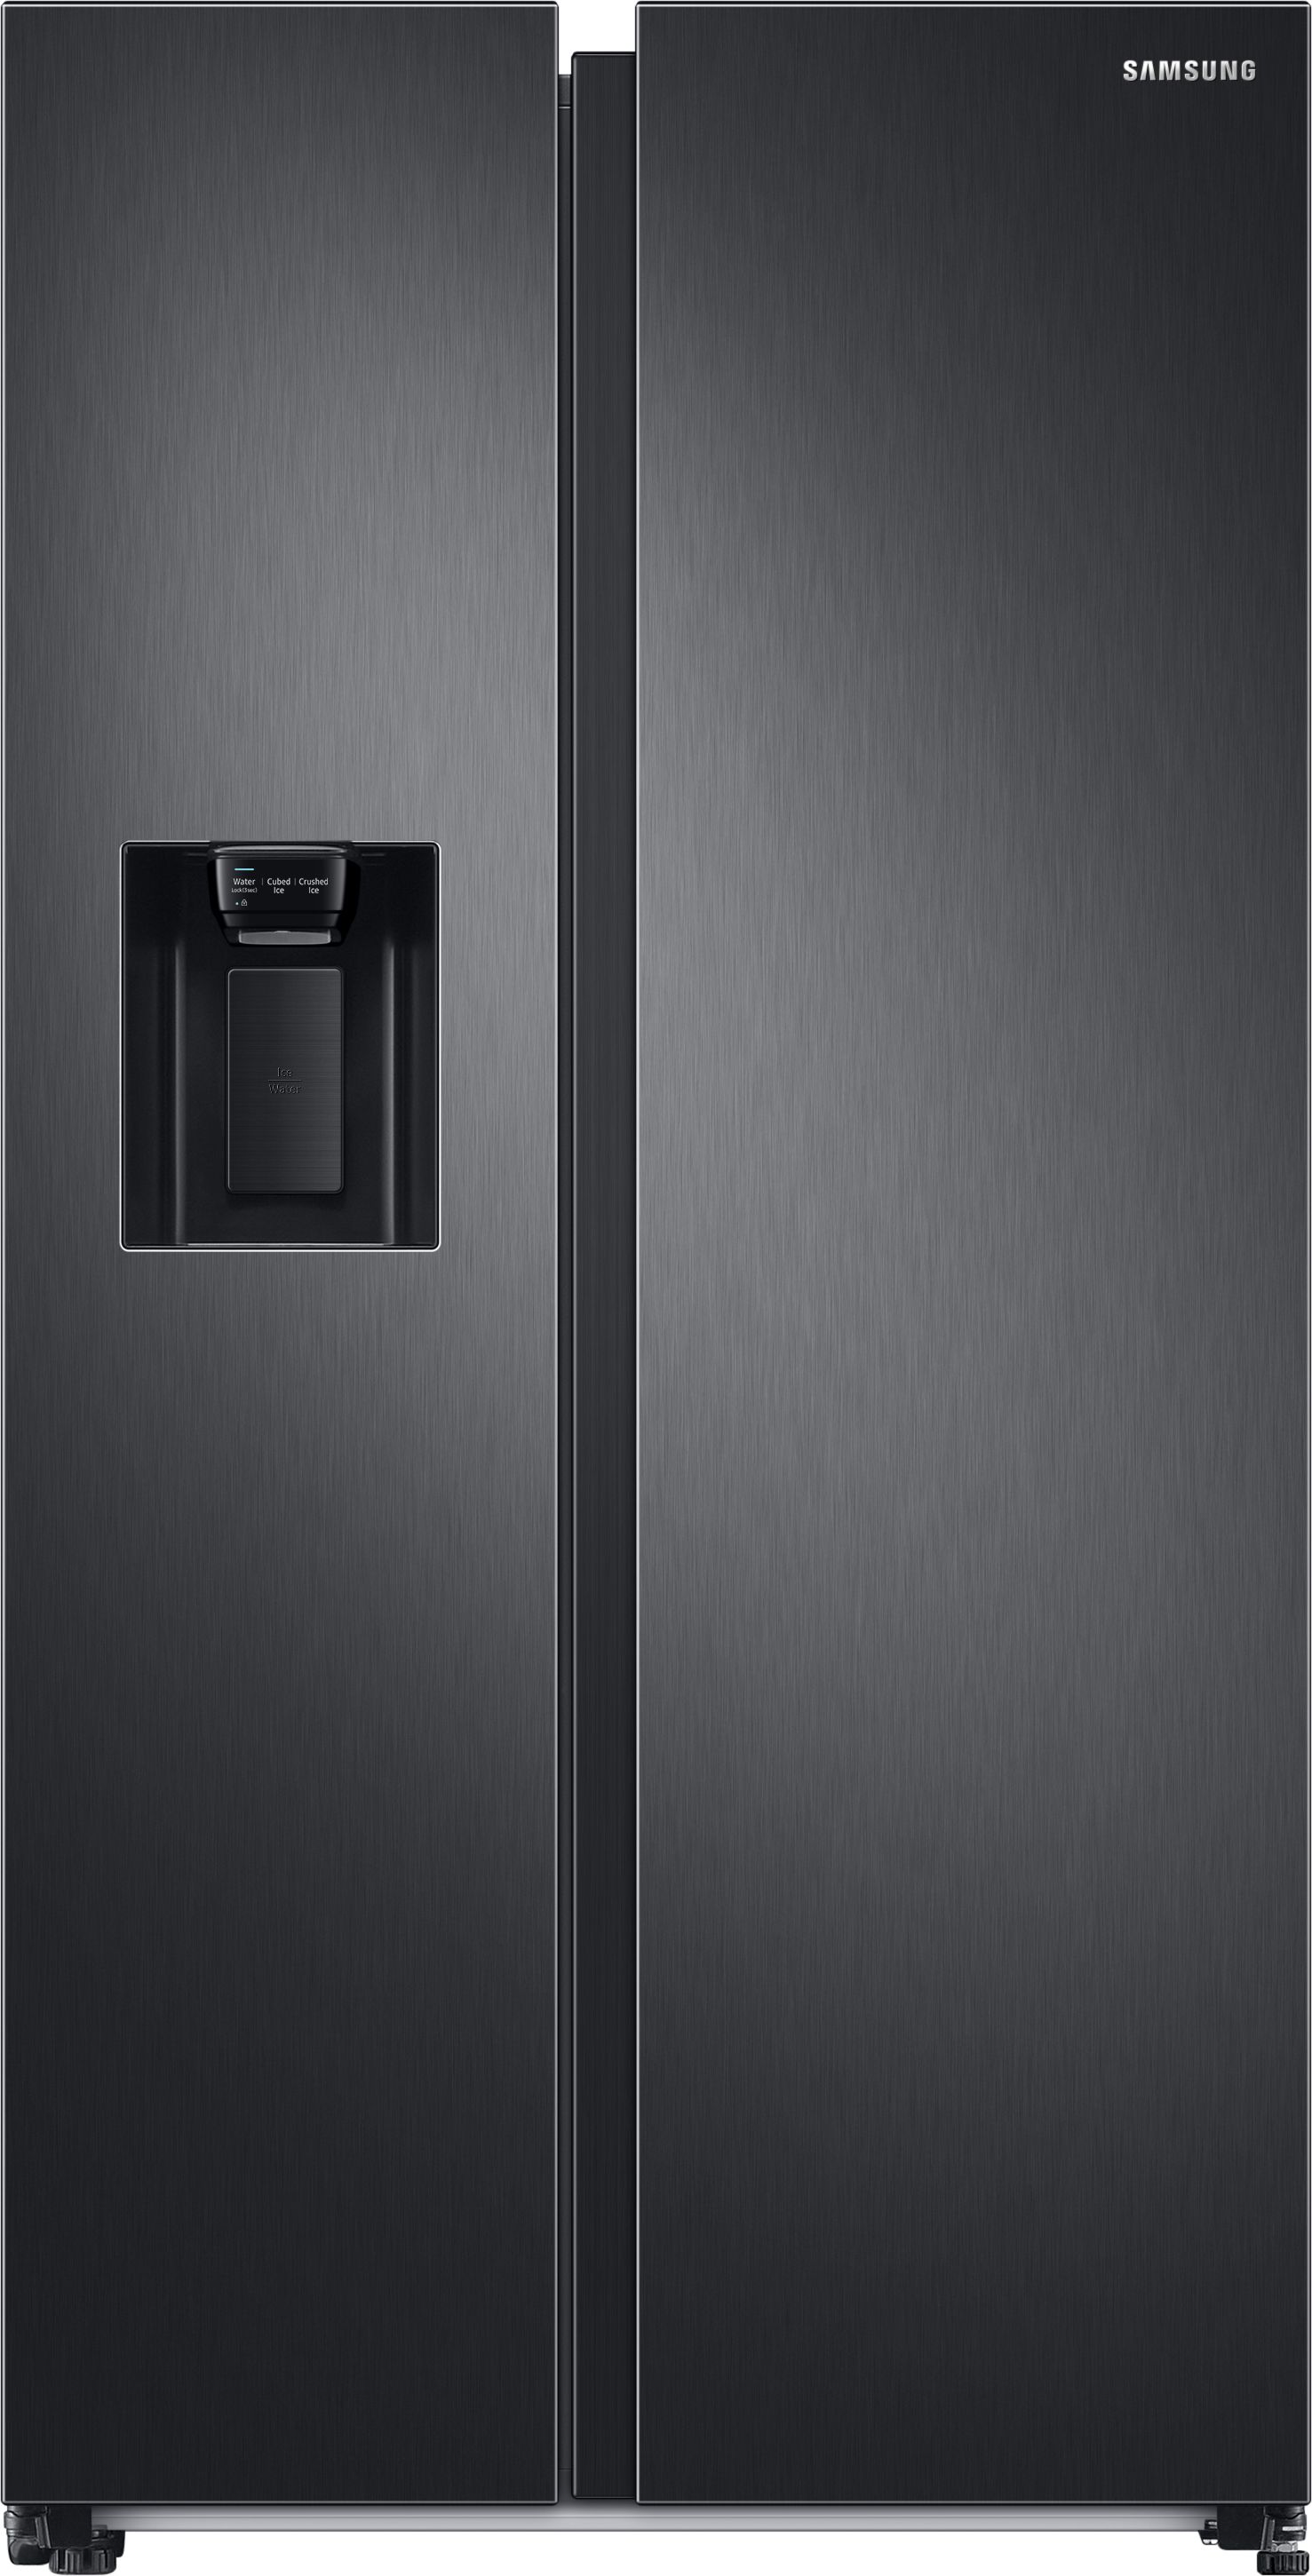 Samsung Series 7 SpaceMax RS68CG883DB1EU Wifi Connected Total No Frost American Fridge Freezer - Black - D Rated, Black